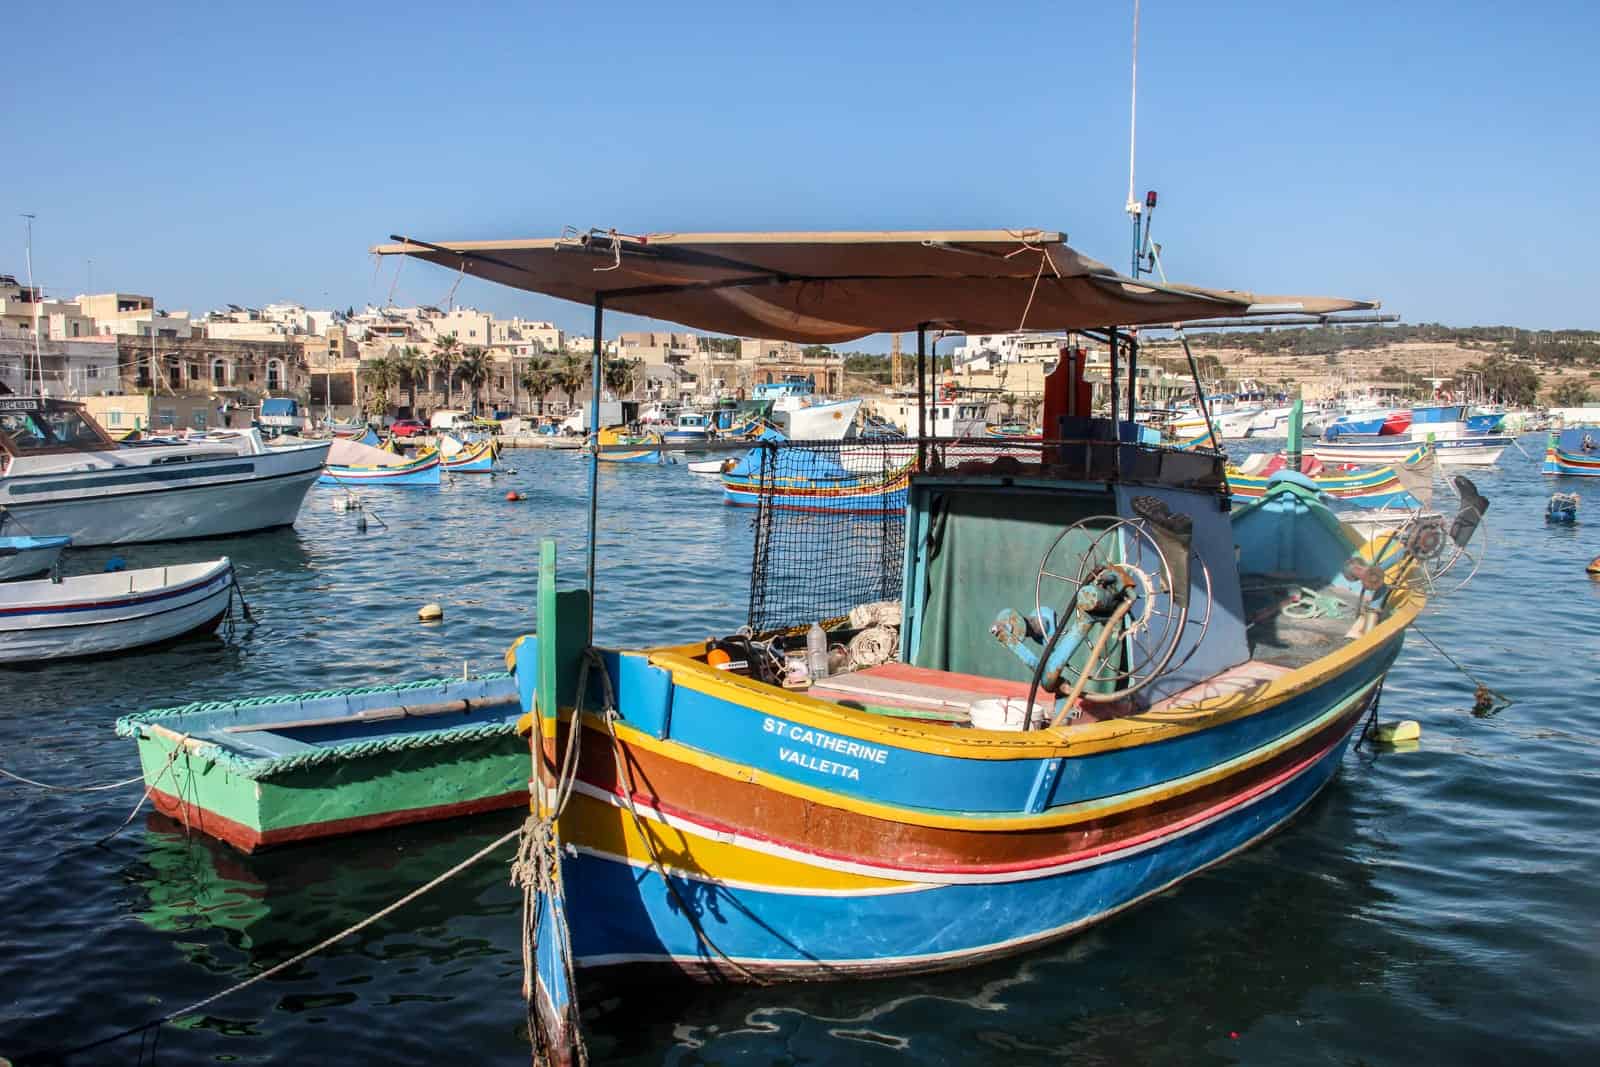 Colourful boats line the water at the pretty fishing village of Marsaxlokk in Malta